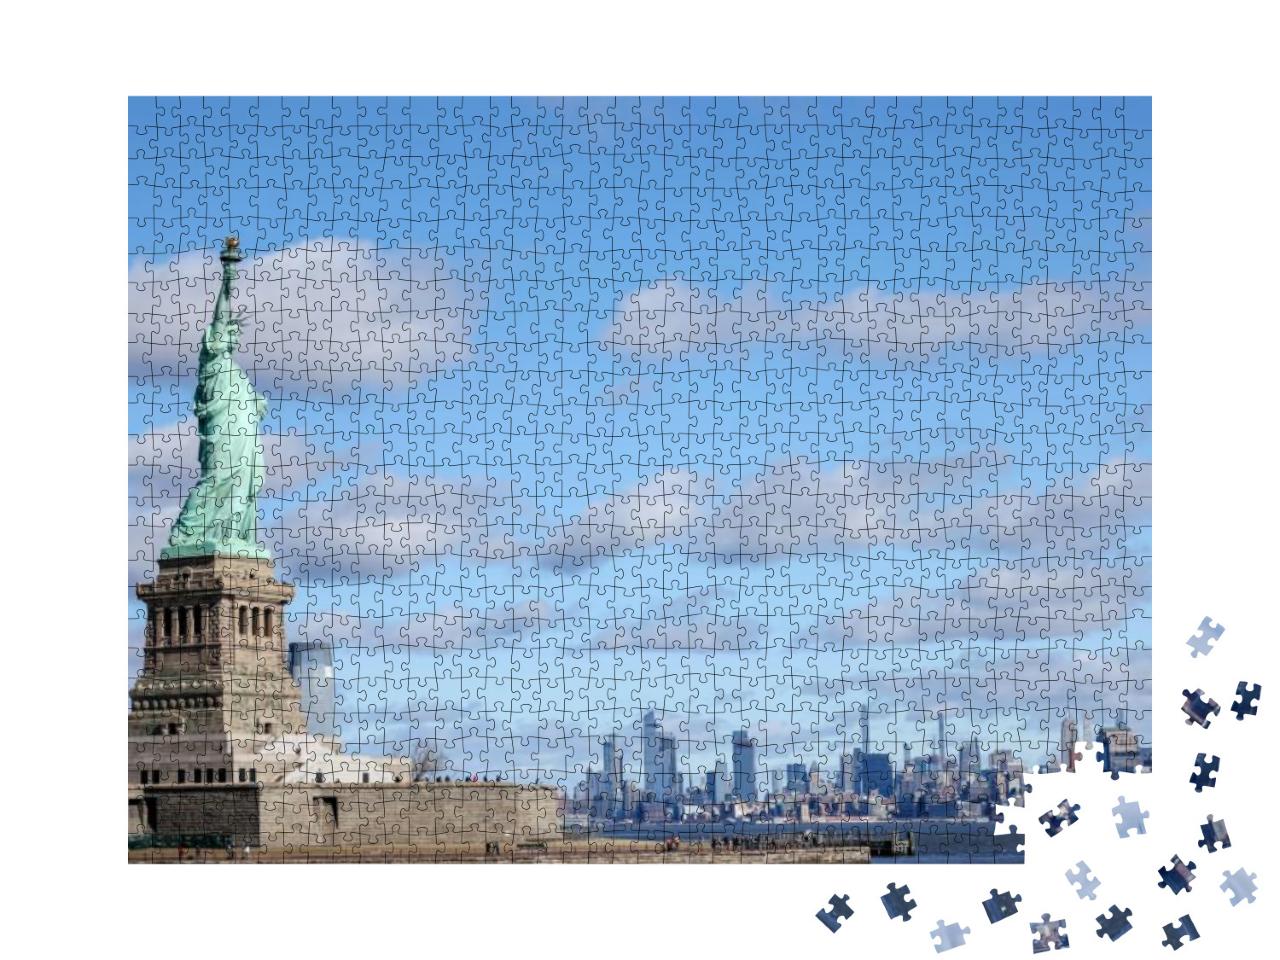 The Statue of Liberty in New York Against a Blue Sky... Jigsaw Puzzle with 1000 pieces